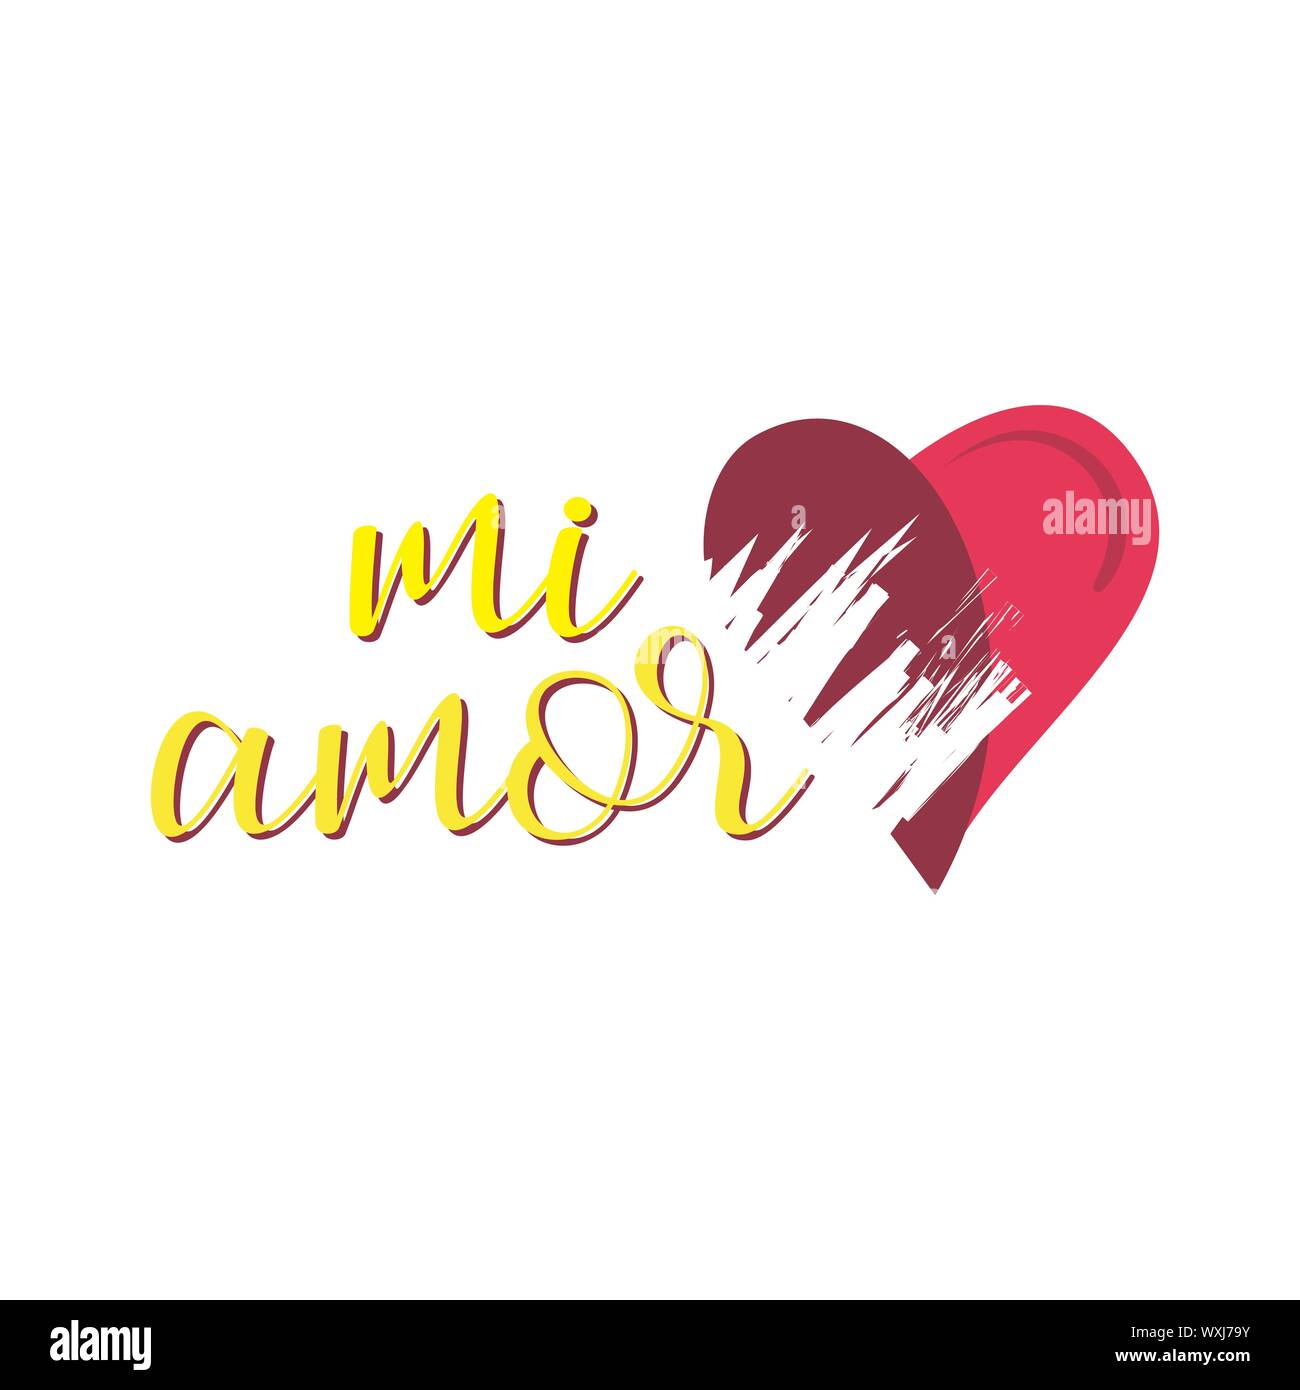 Amor White Heart Out Cotton Red Stock Photo 68368333